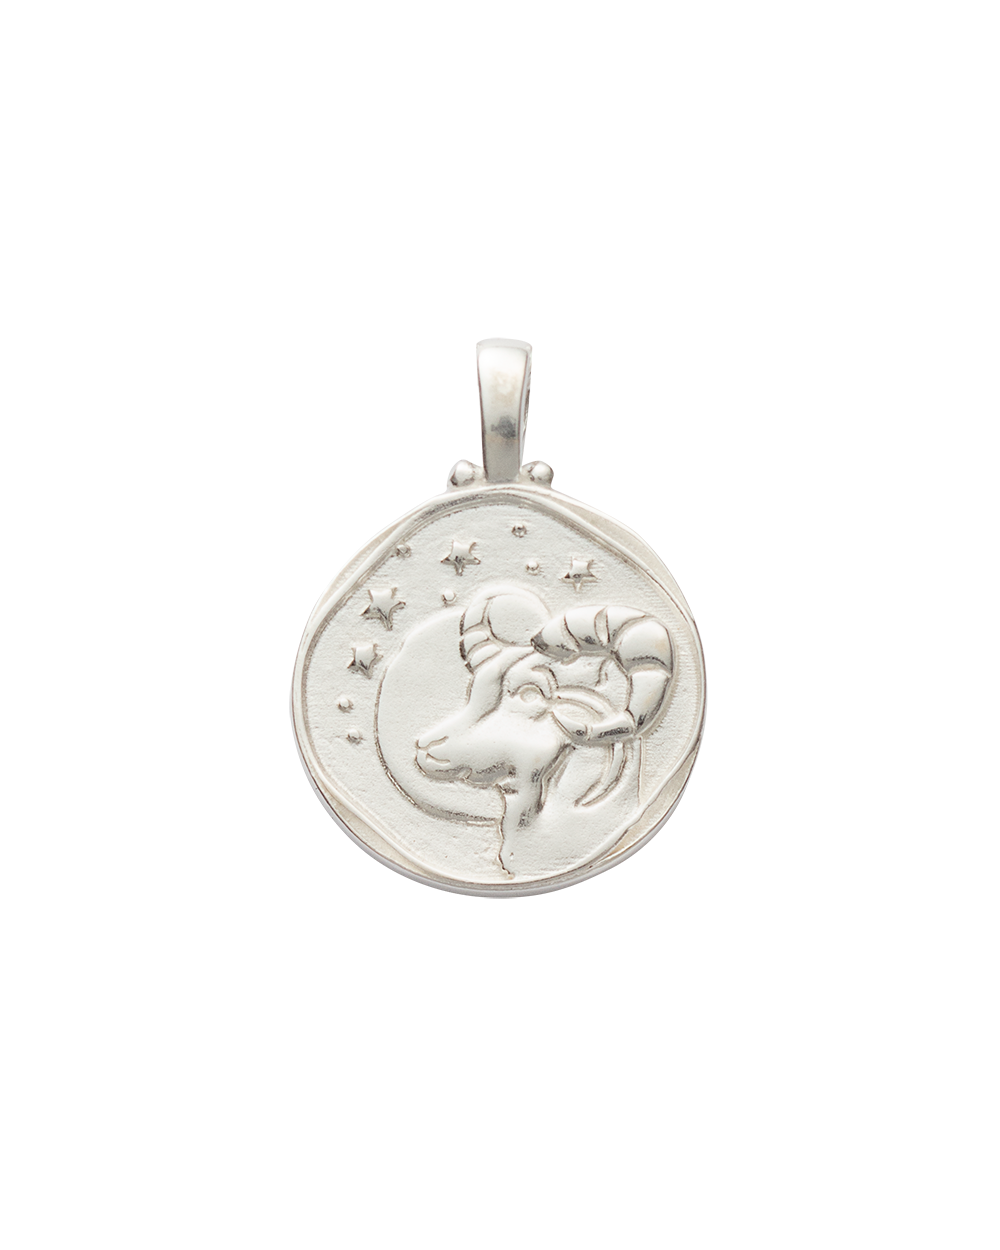 ARIES ZODIAC (STERLING SILVER) - IMAGE 1